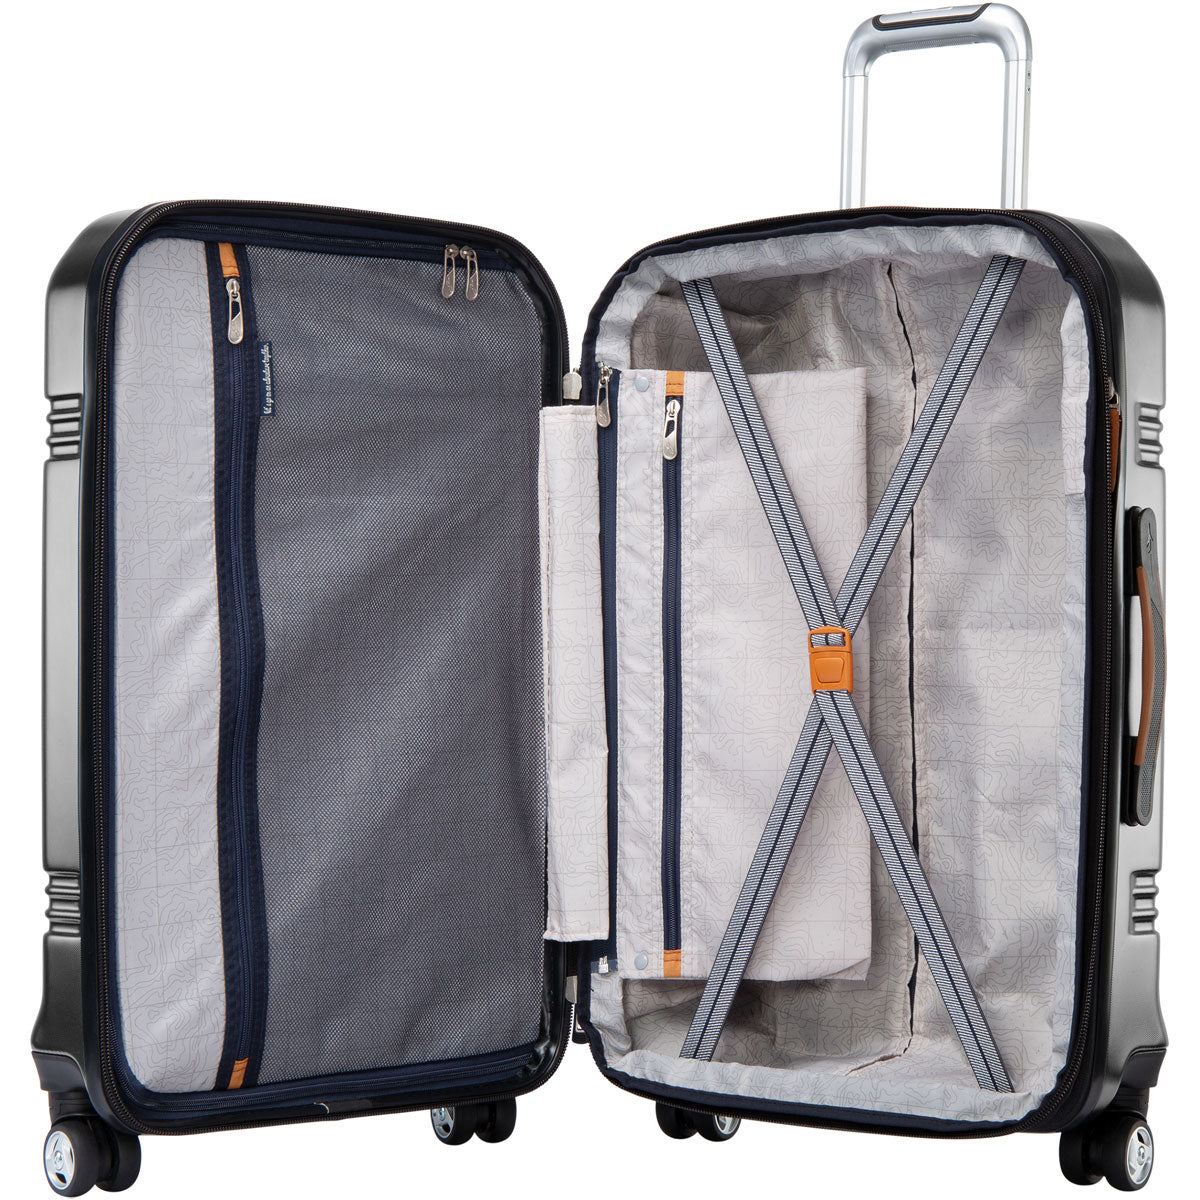 Lexington Luggage - Specialty Luggage & Travelgoods For Over 40 Years!